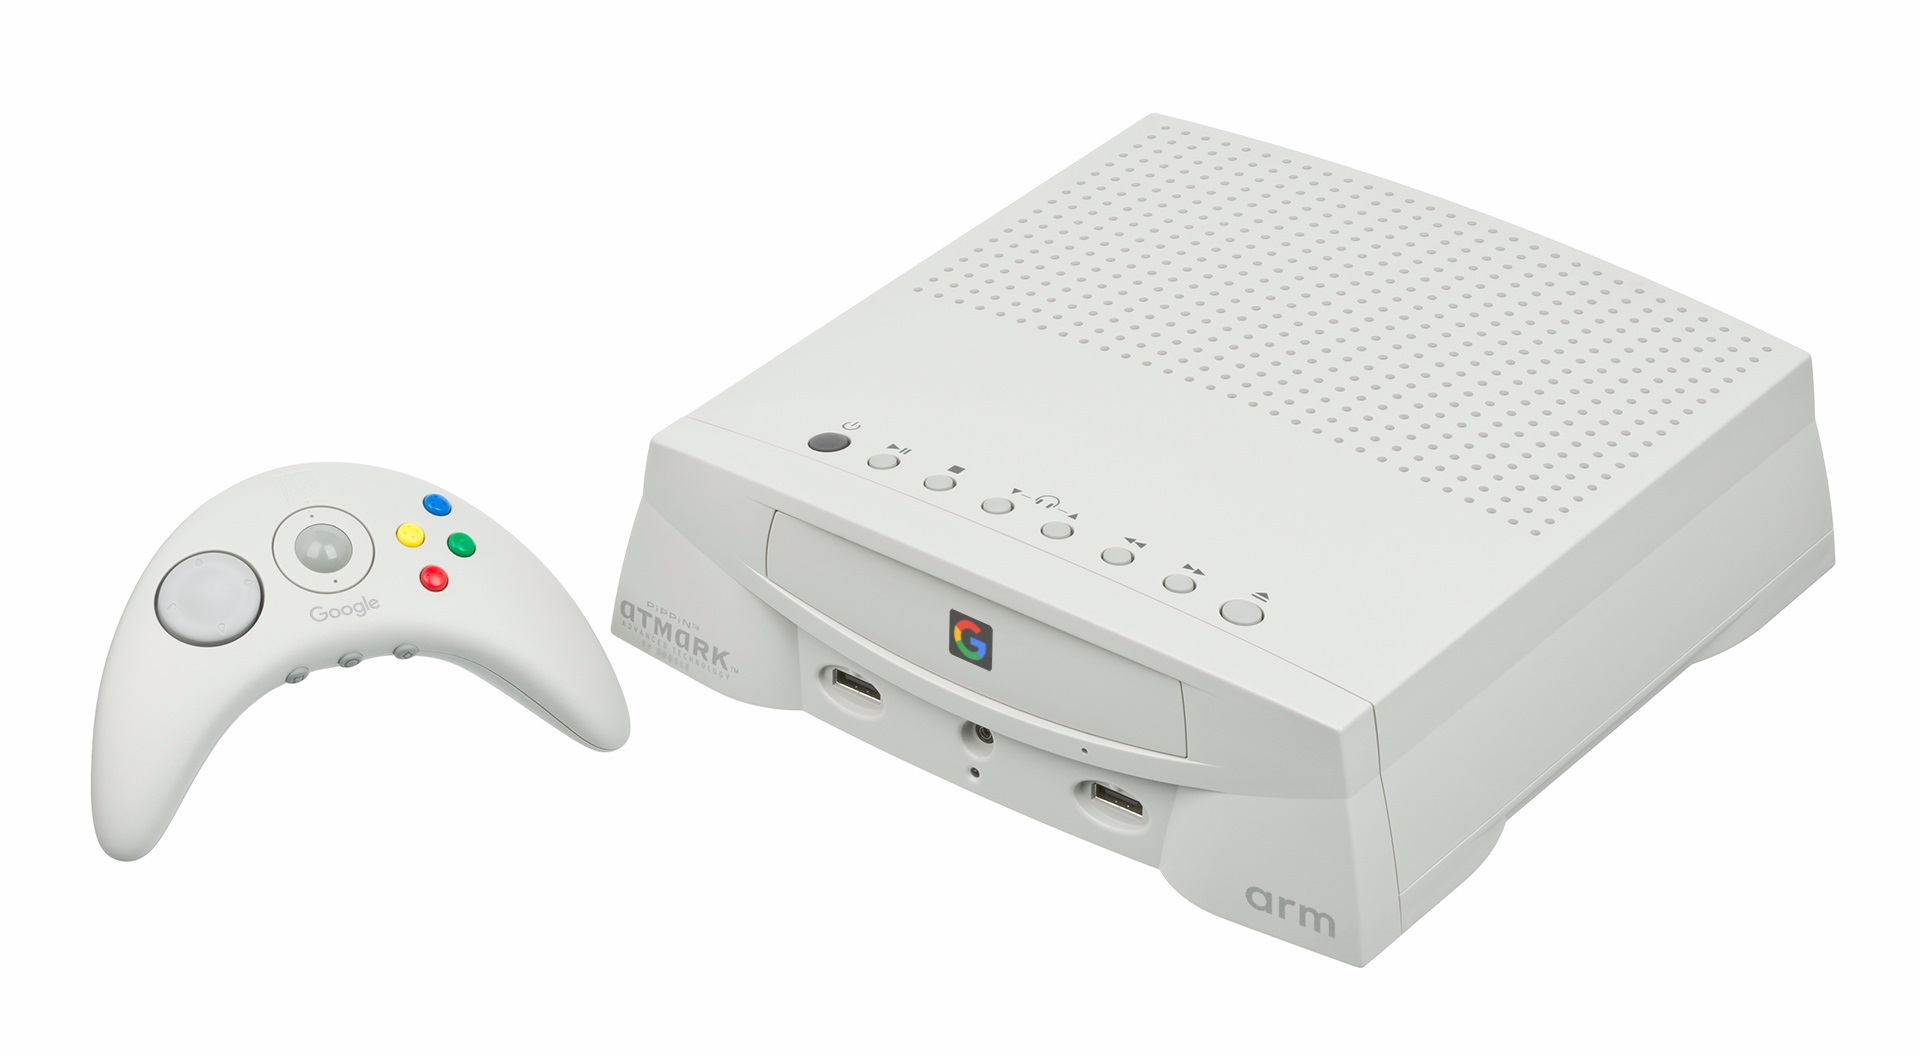 Google's challenge to game consoles to kick off in November